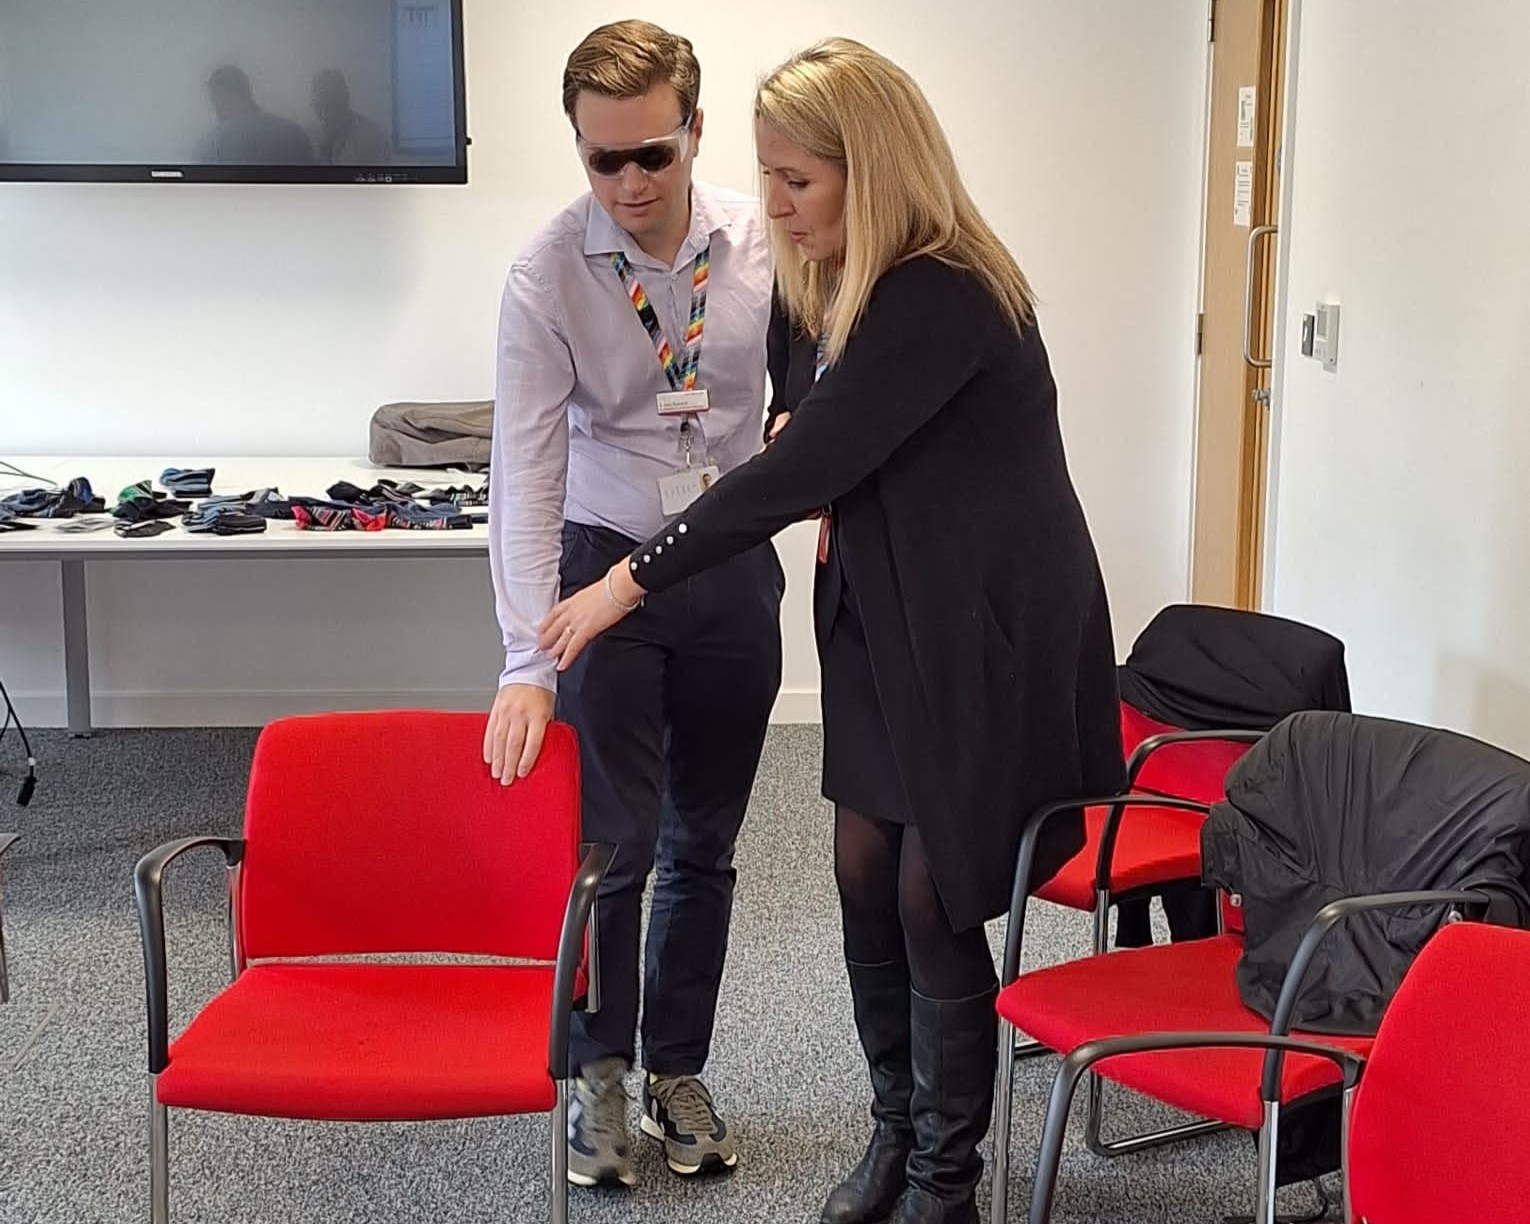 Greater Anglia staff during the sighted guide session. A male staff member is wearing sim-specs, and being guided to a red chair by a female colleague.